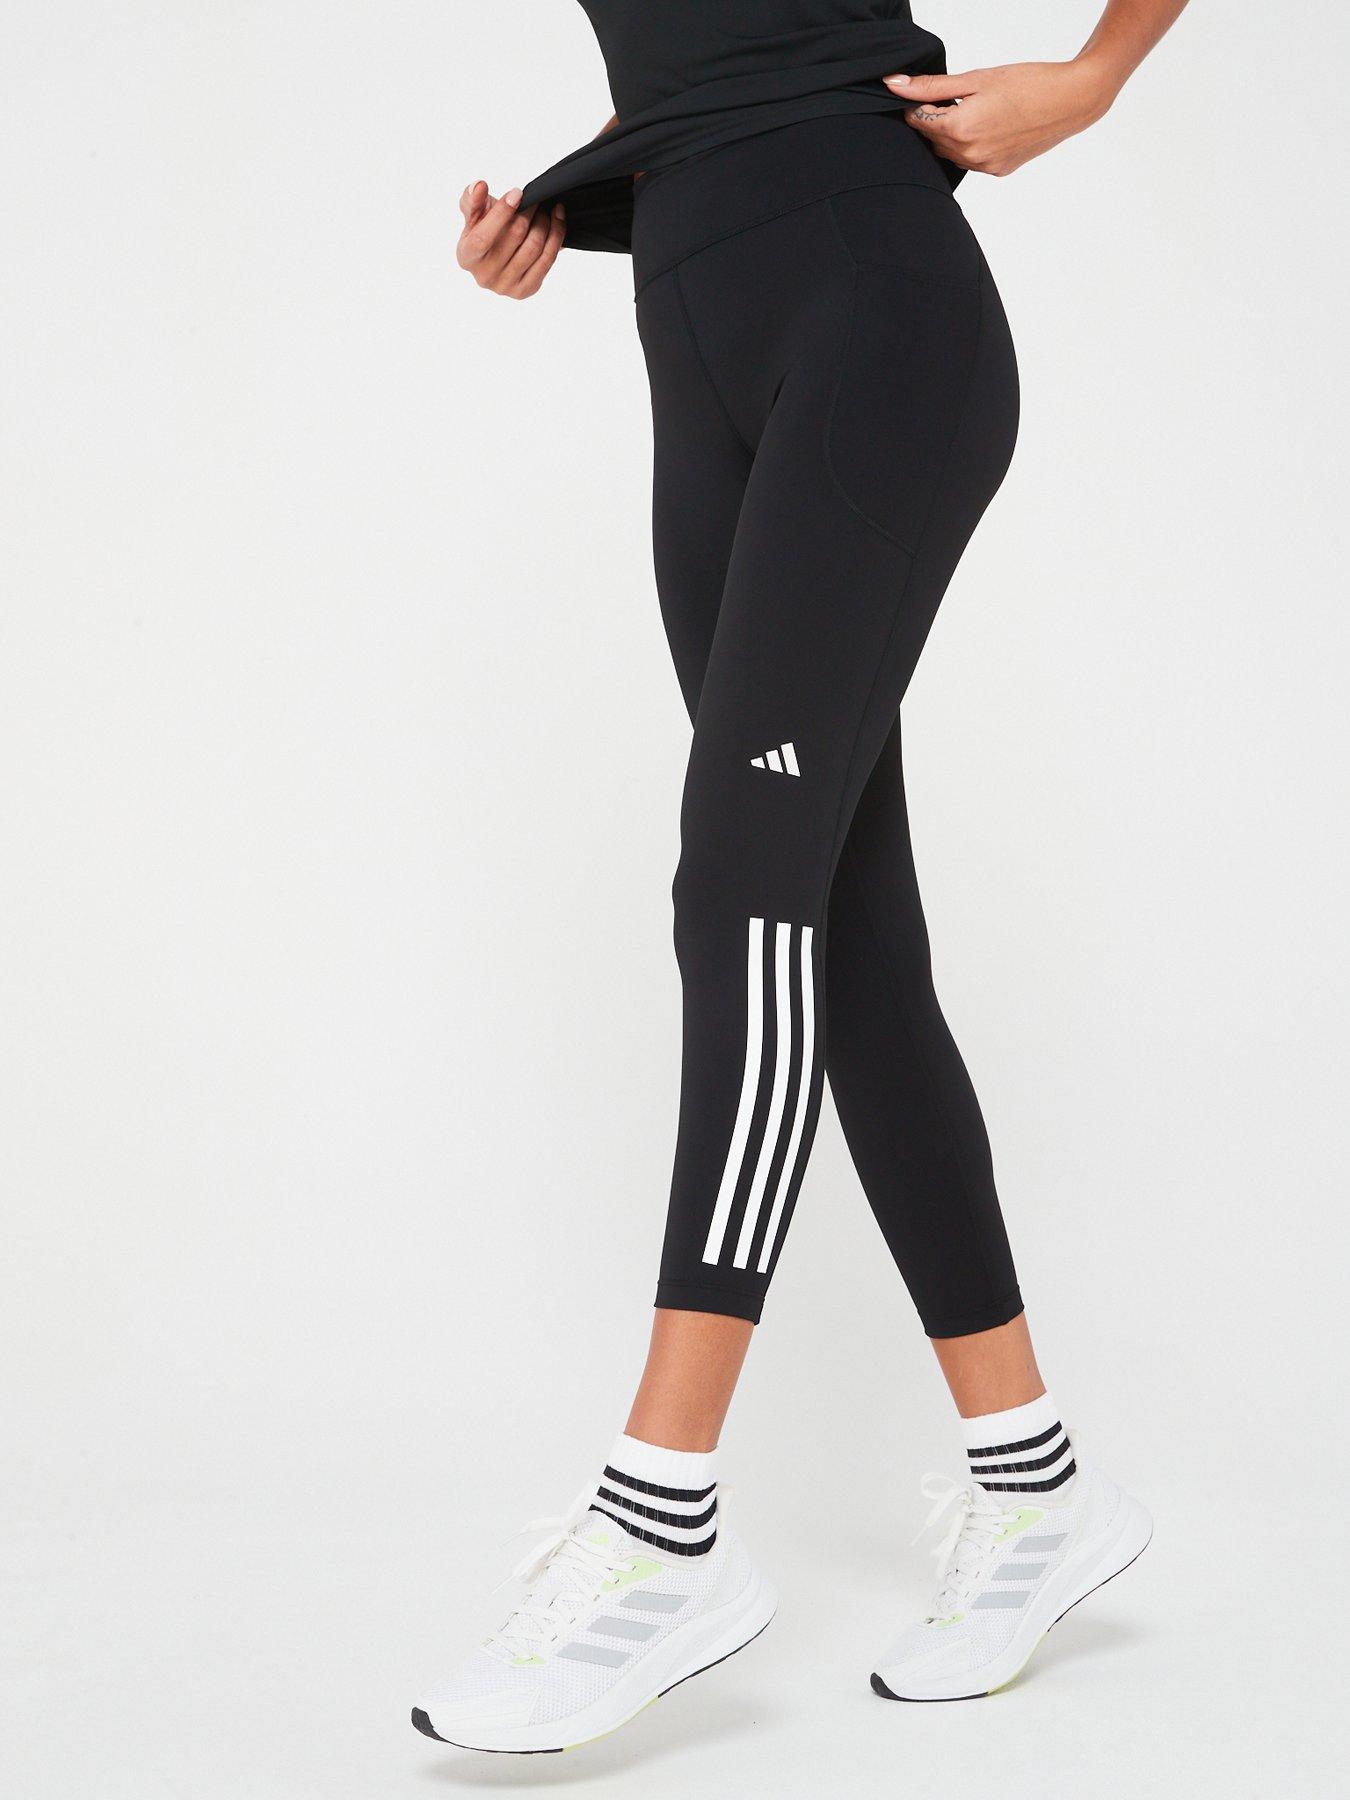 adidas, Pants & Jumpsuits, Adidas Climalite Modelled Black Capris Workout Running  Tights Size Small